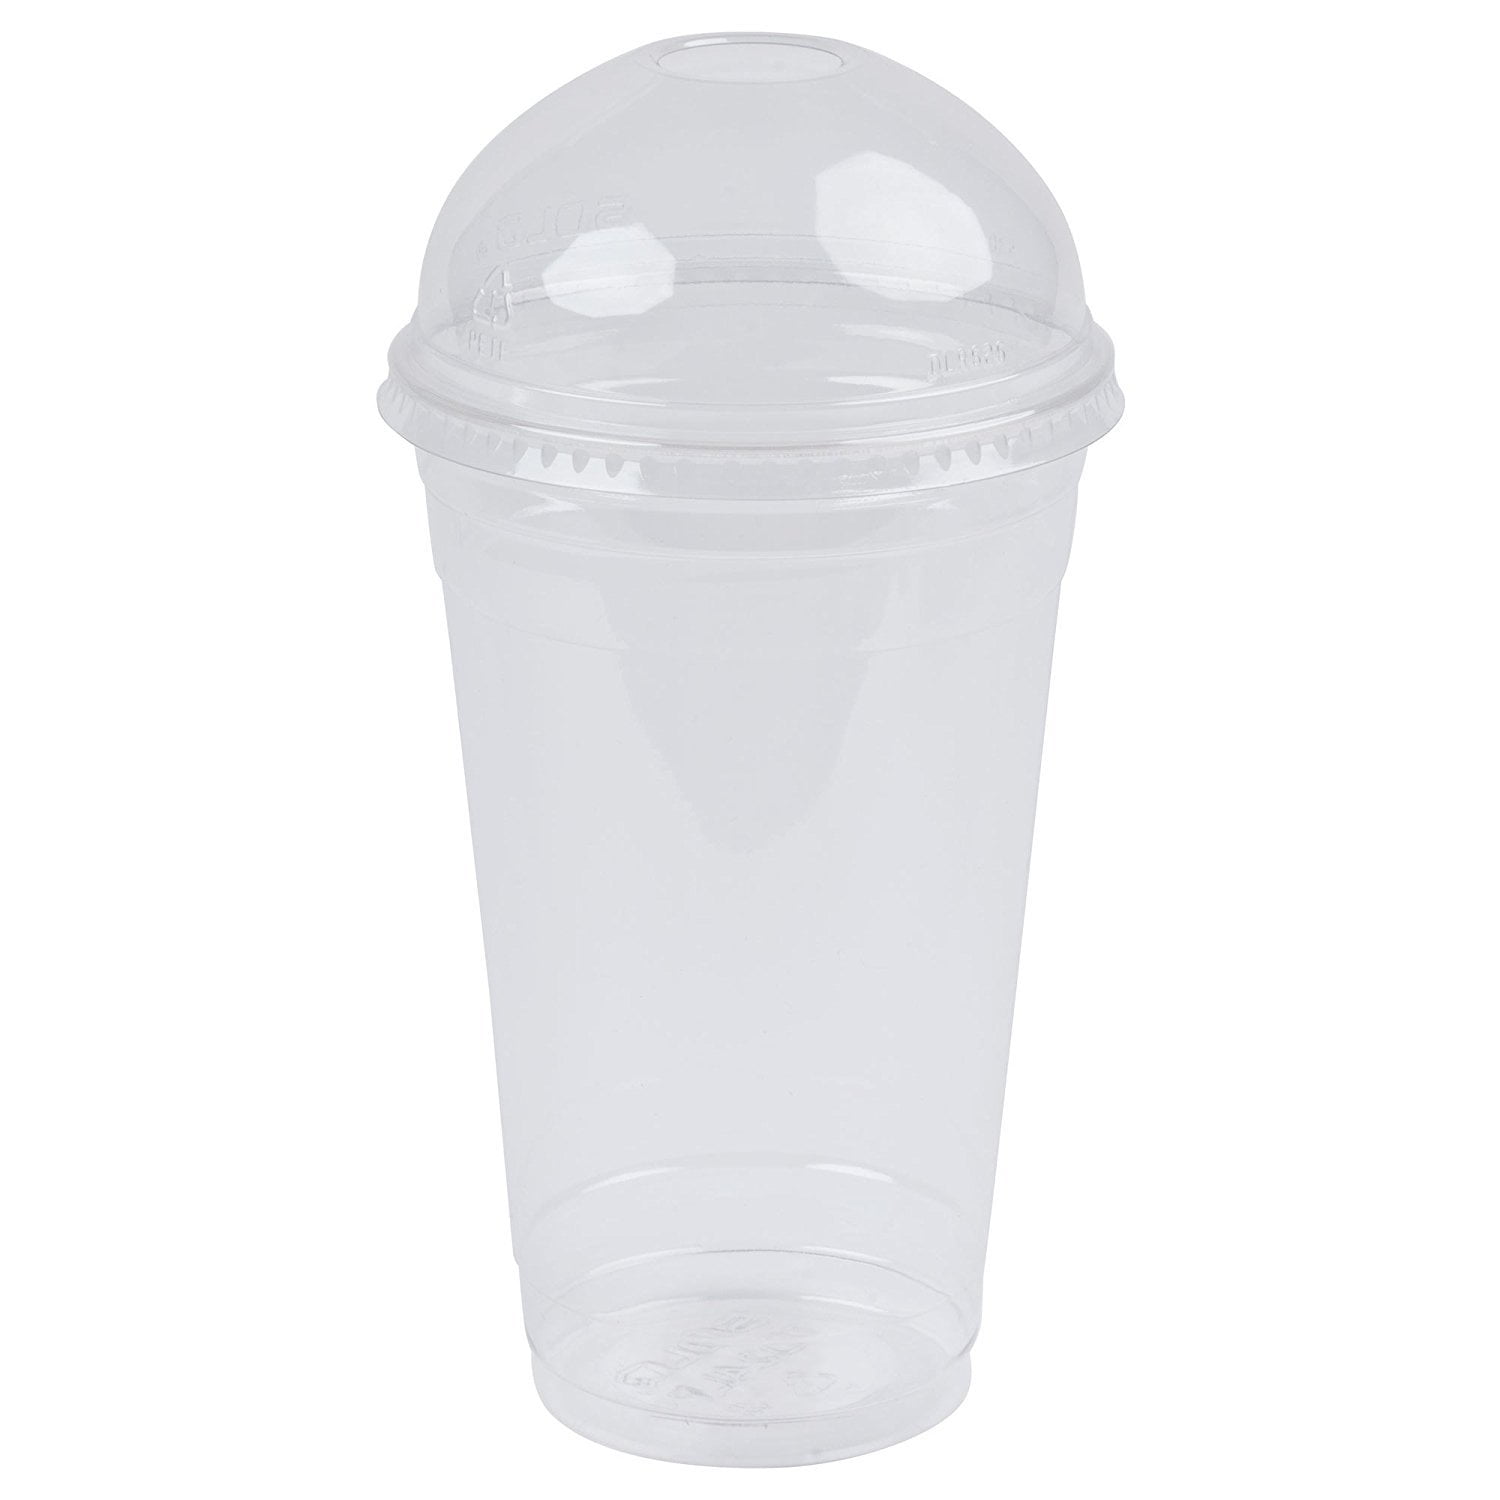 Clear Plastic Disposable Cups for Iced Coffee Bubble Boba Tea Smoothie, 16 oz - 100 Sets with Dome Lids